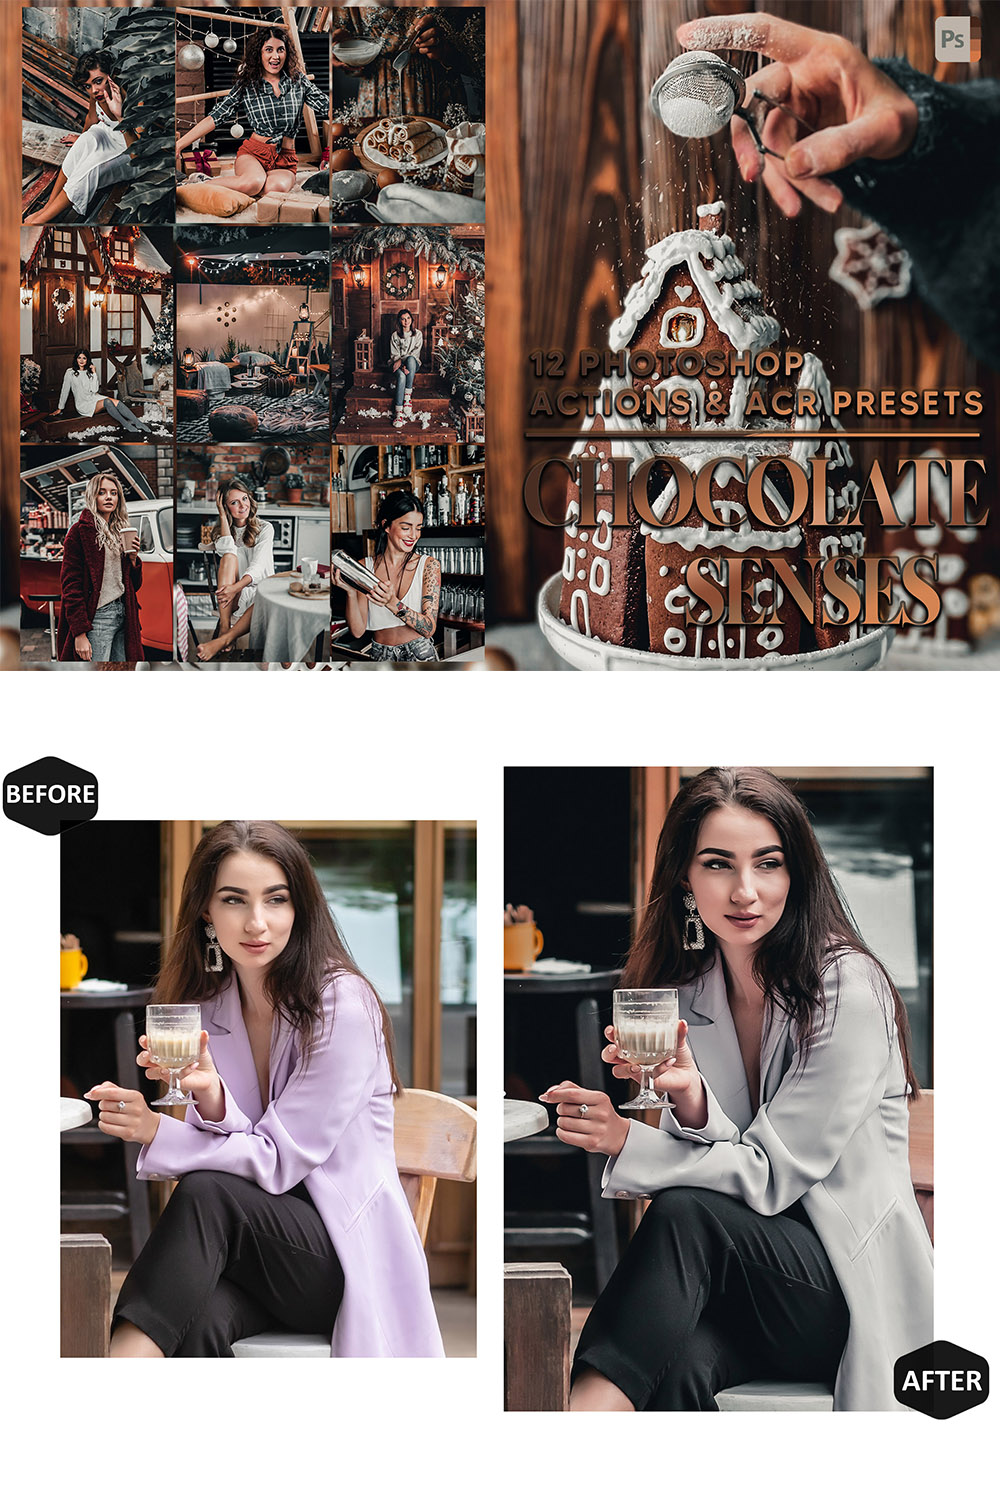 12 Photoshop Actions, Chocolate Senses Ps Action, Brown ACR Preset, Feminine Ps Filter, Atn Portrait And Lifestyle Theme For Instagram, Blogger pinterest preview image.